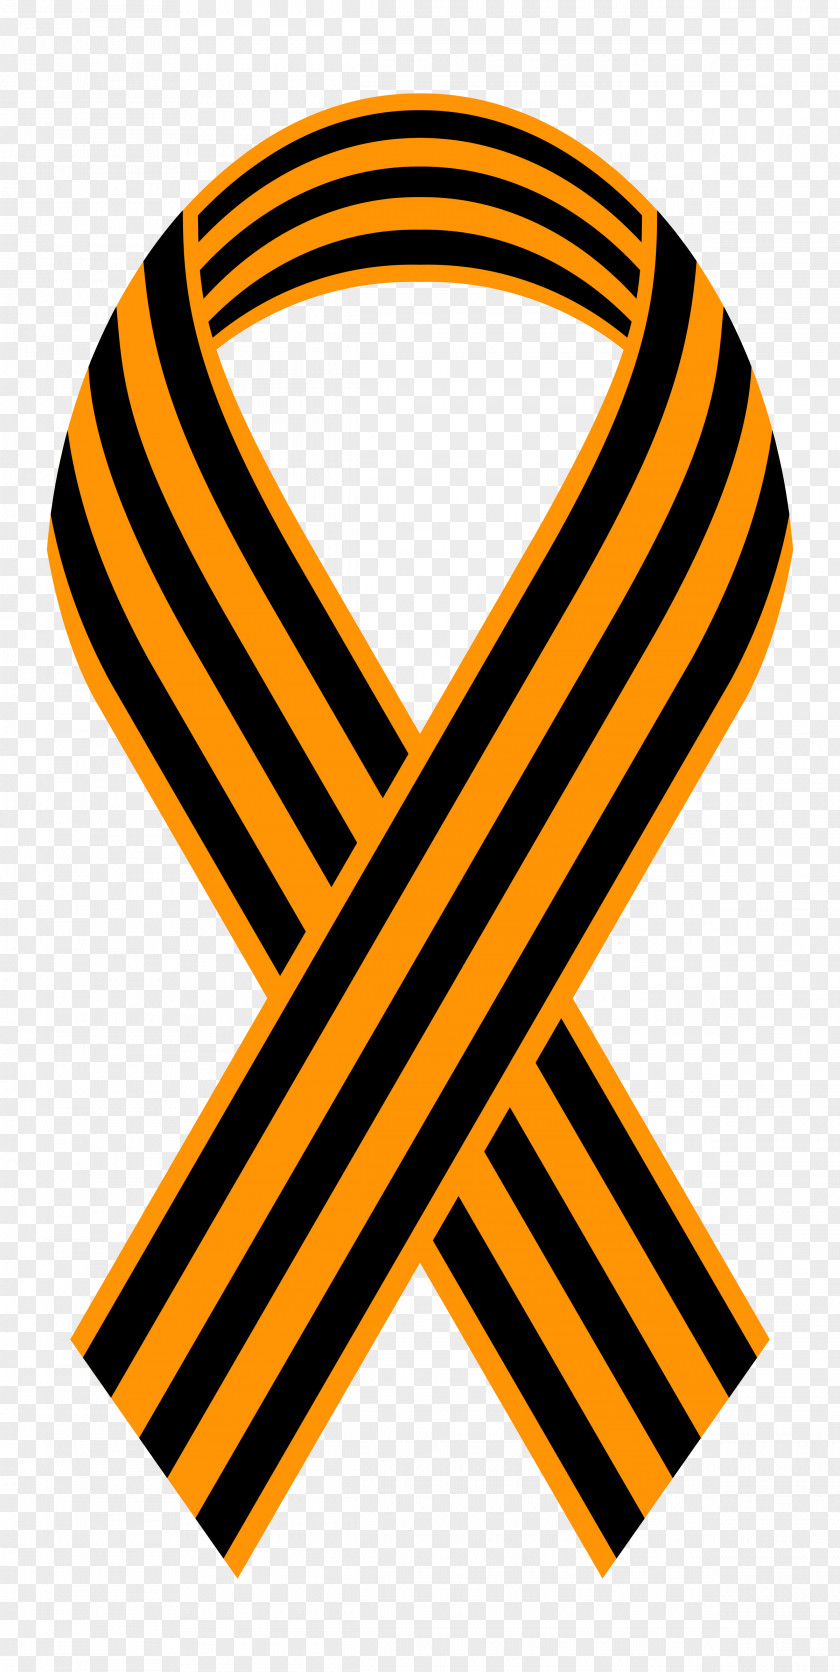 Victory Ribbon Of Saint George 2014 Pro-Russian Unrest In Ukraine Yellow PNG